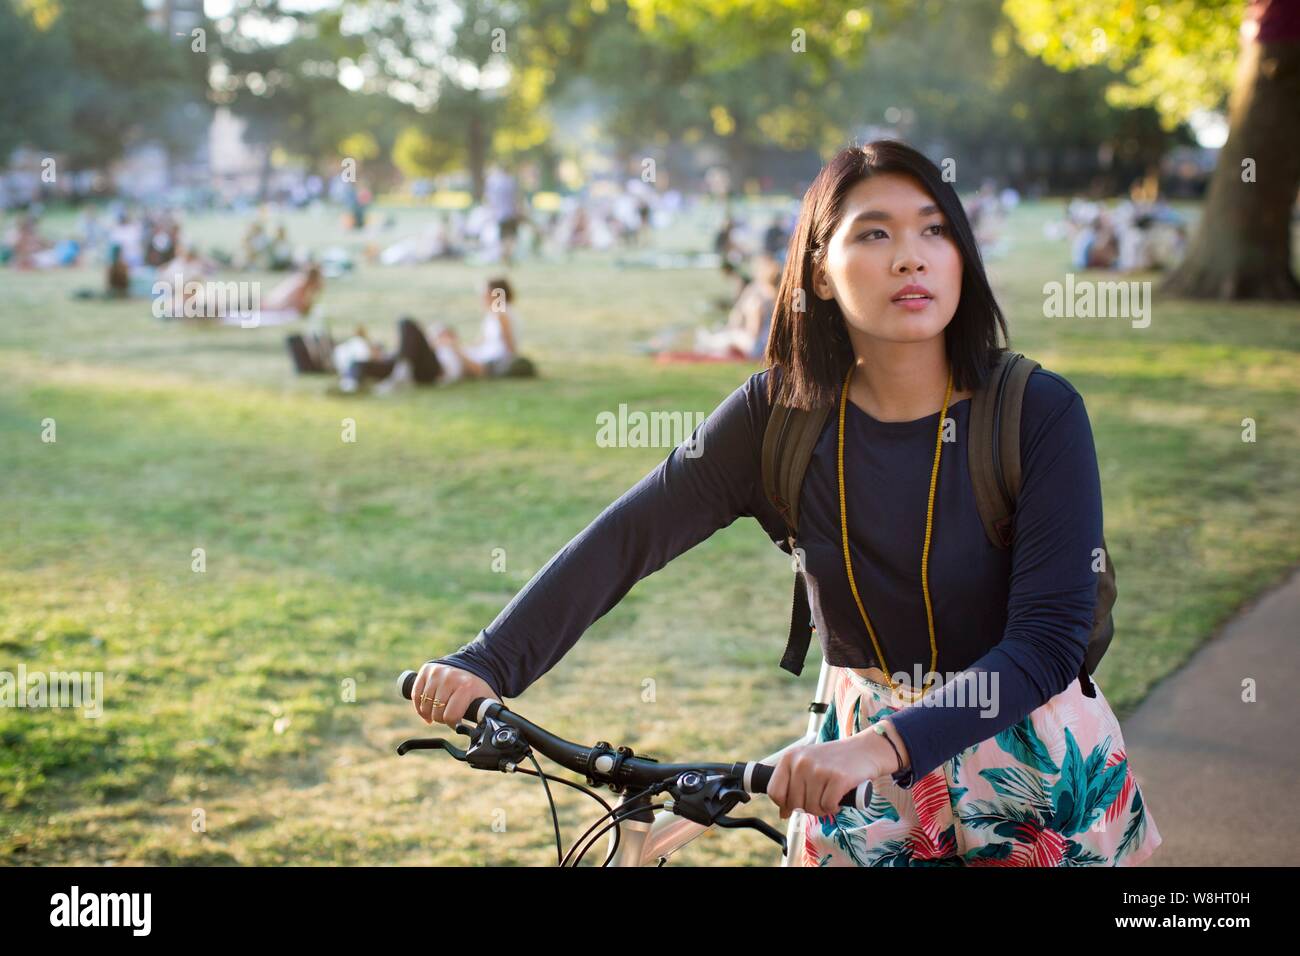 Young woman pushing bicycle in park. Stock Photo